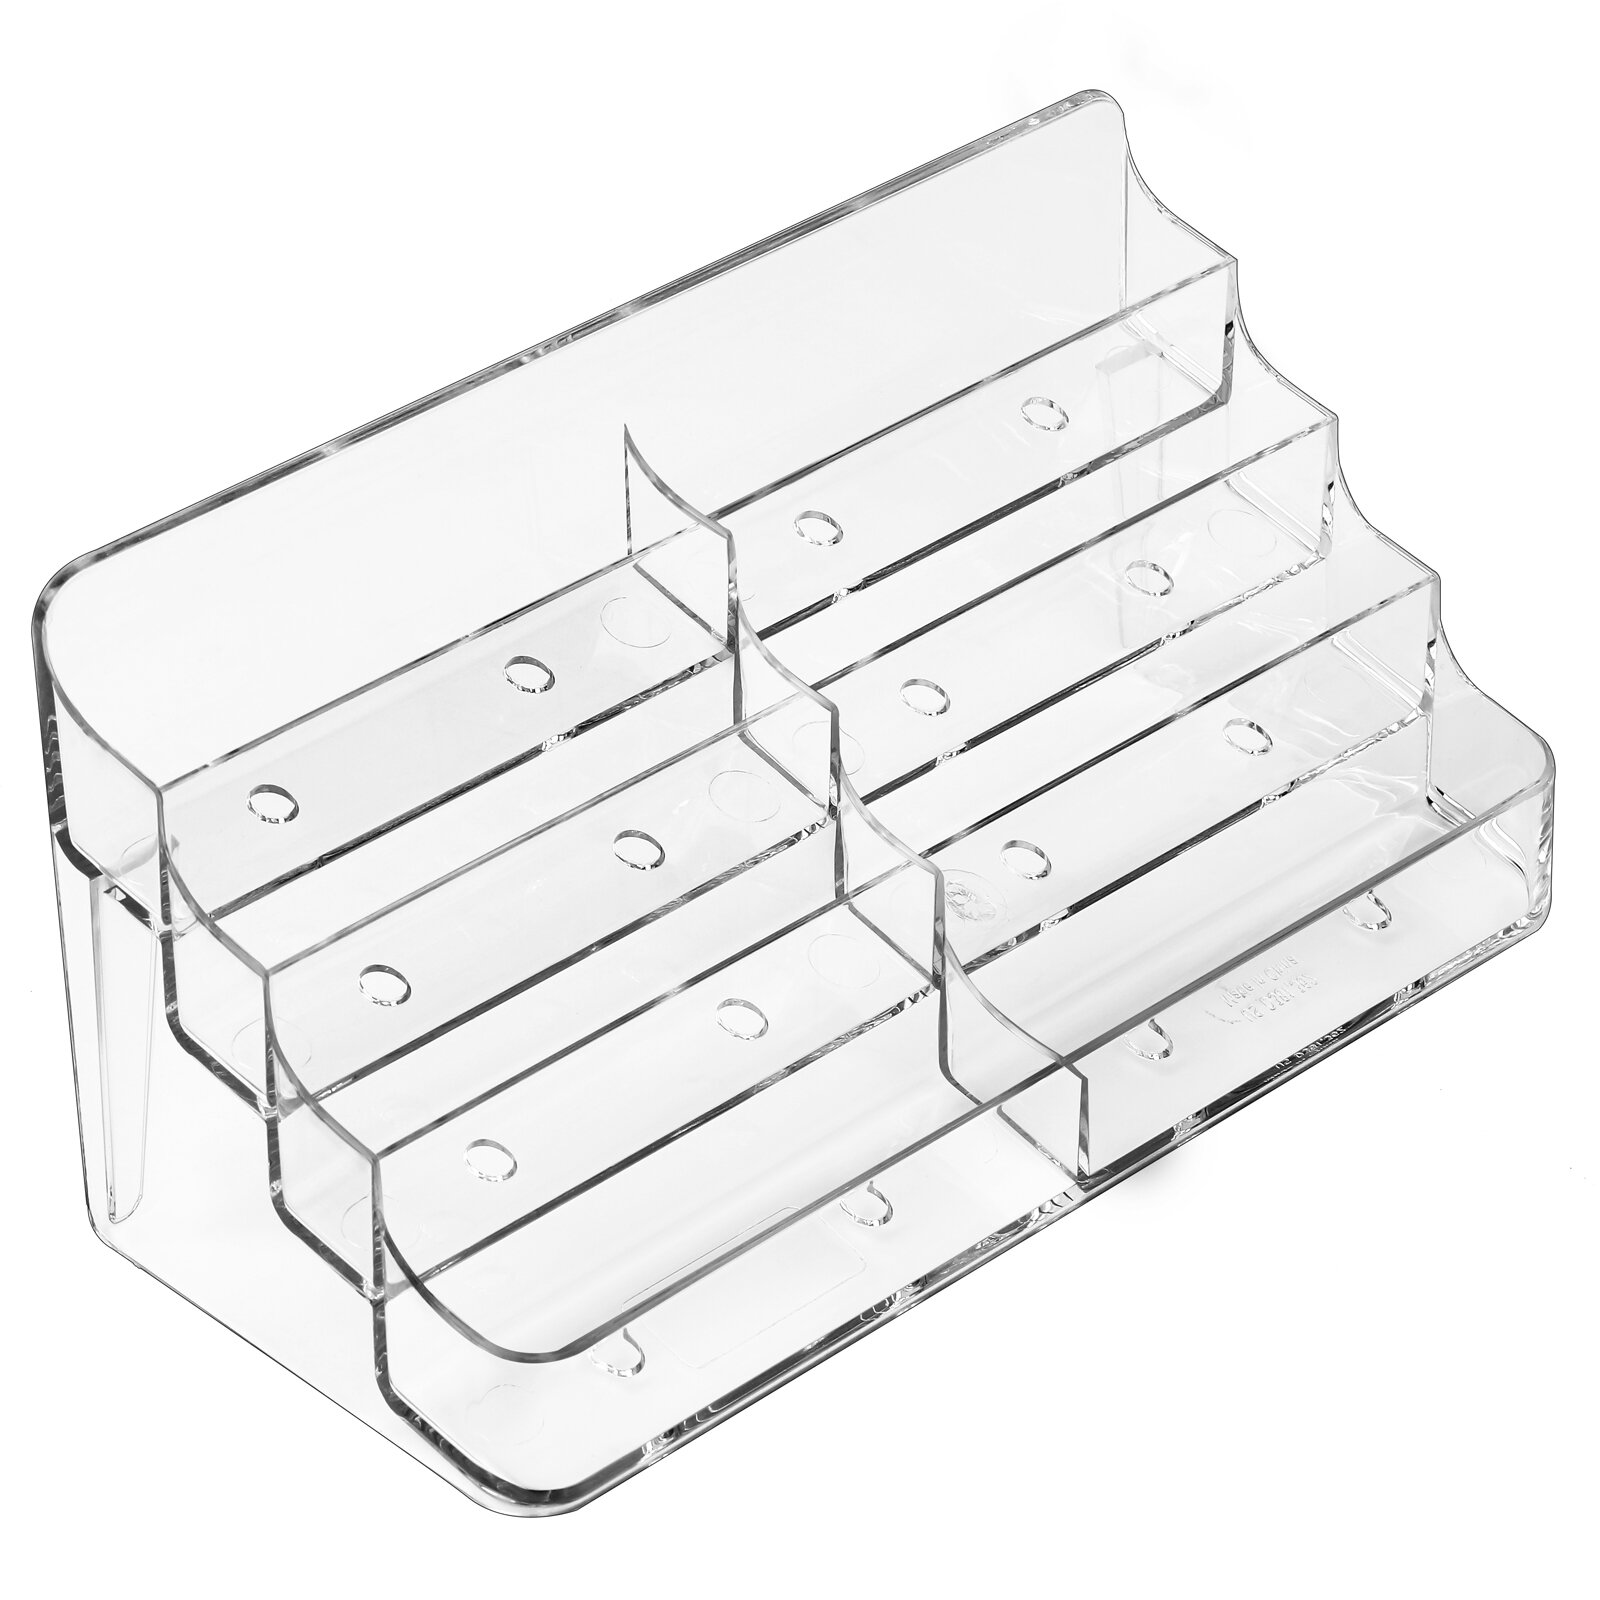 Clear Acrylic Business Card Holder Display Stand for Office Desk 